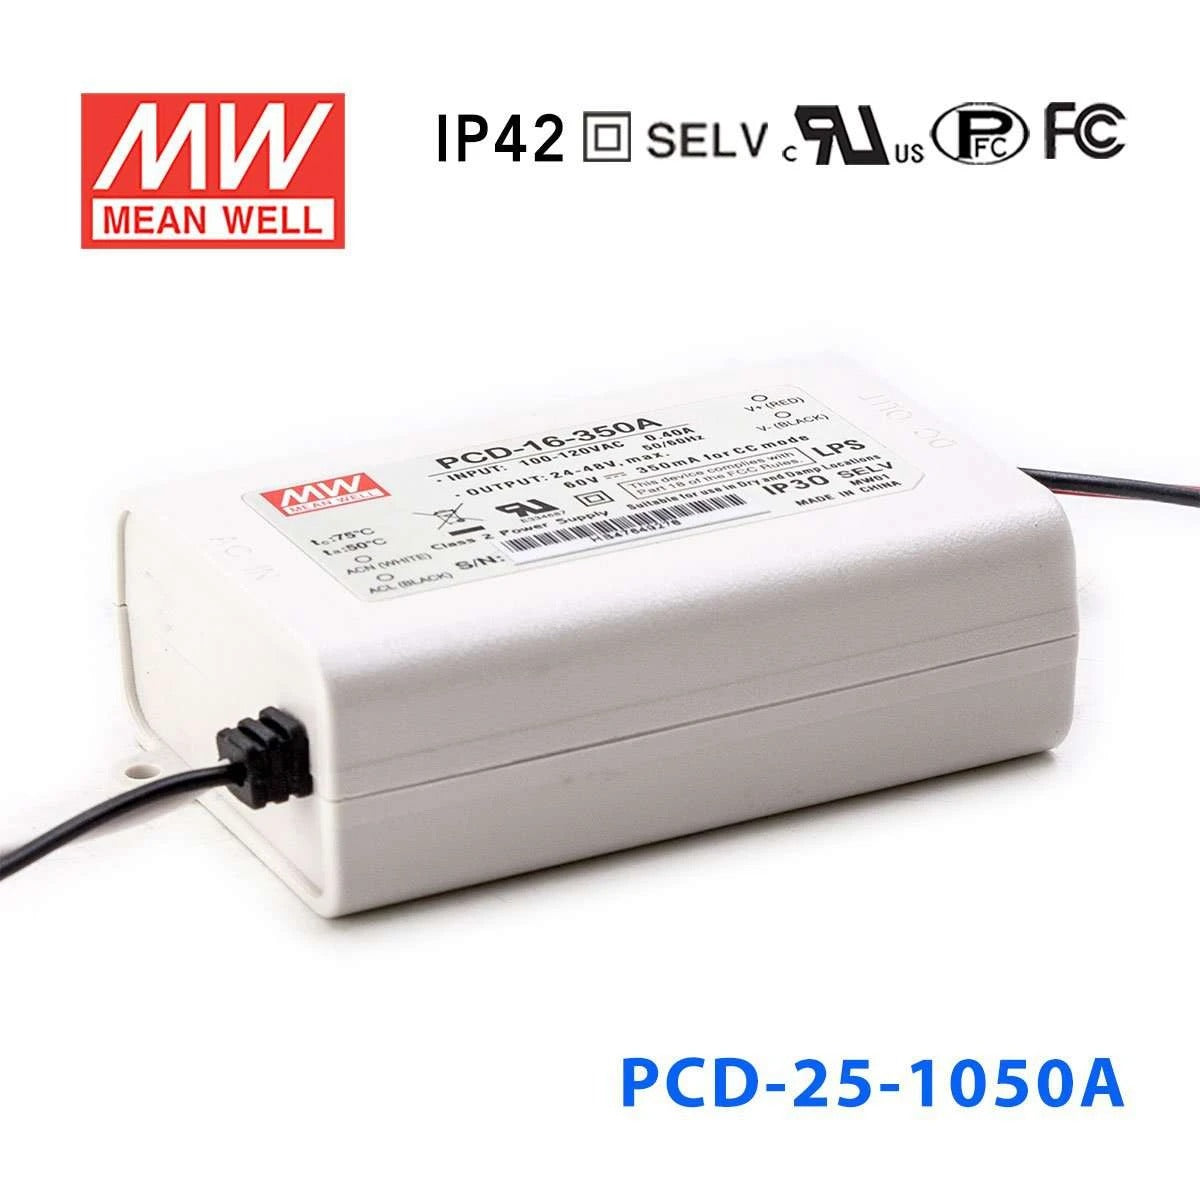 Mean Well PCD-25-1050A Power Supply 25W 1050mA